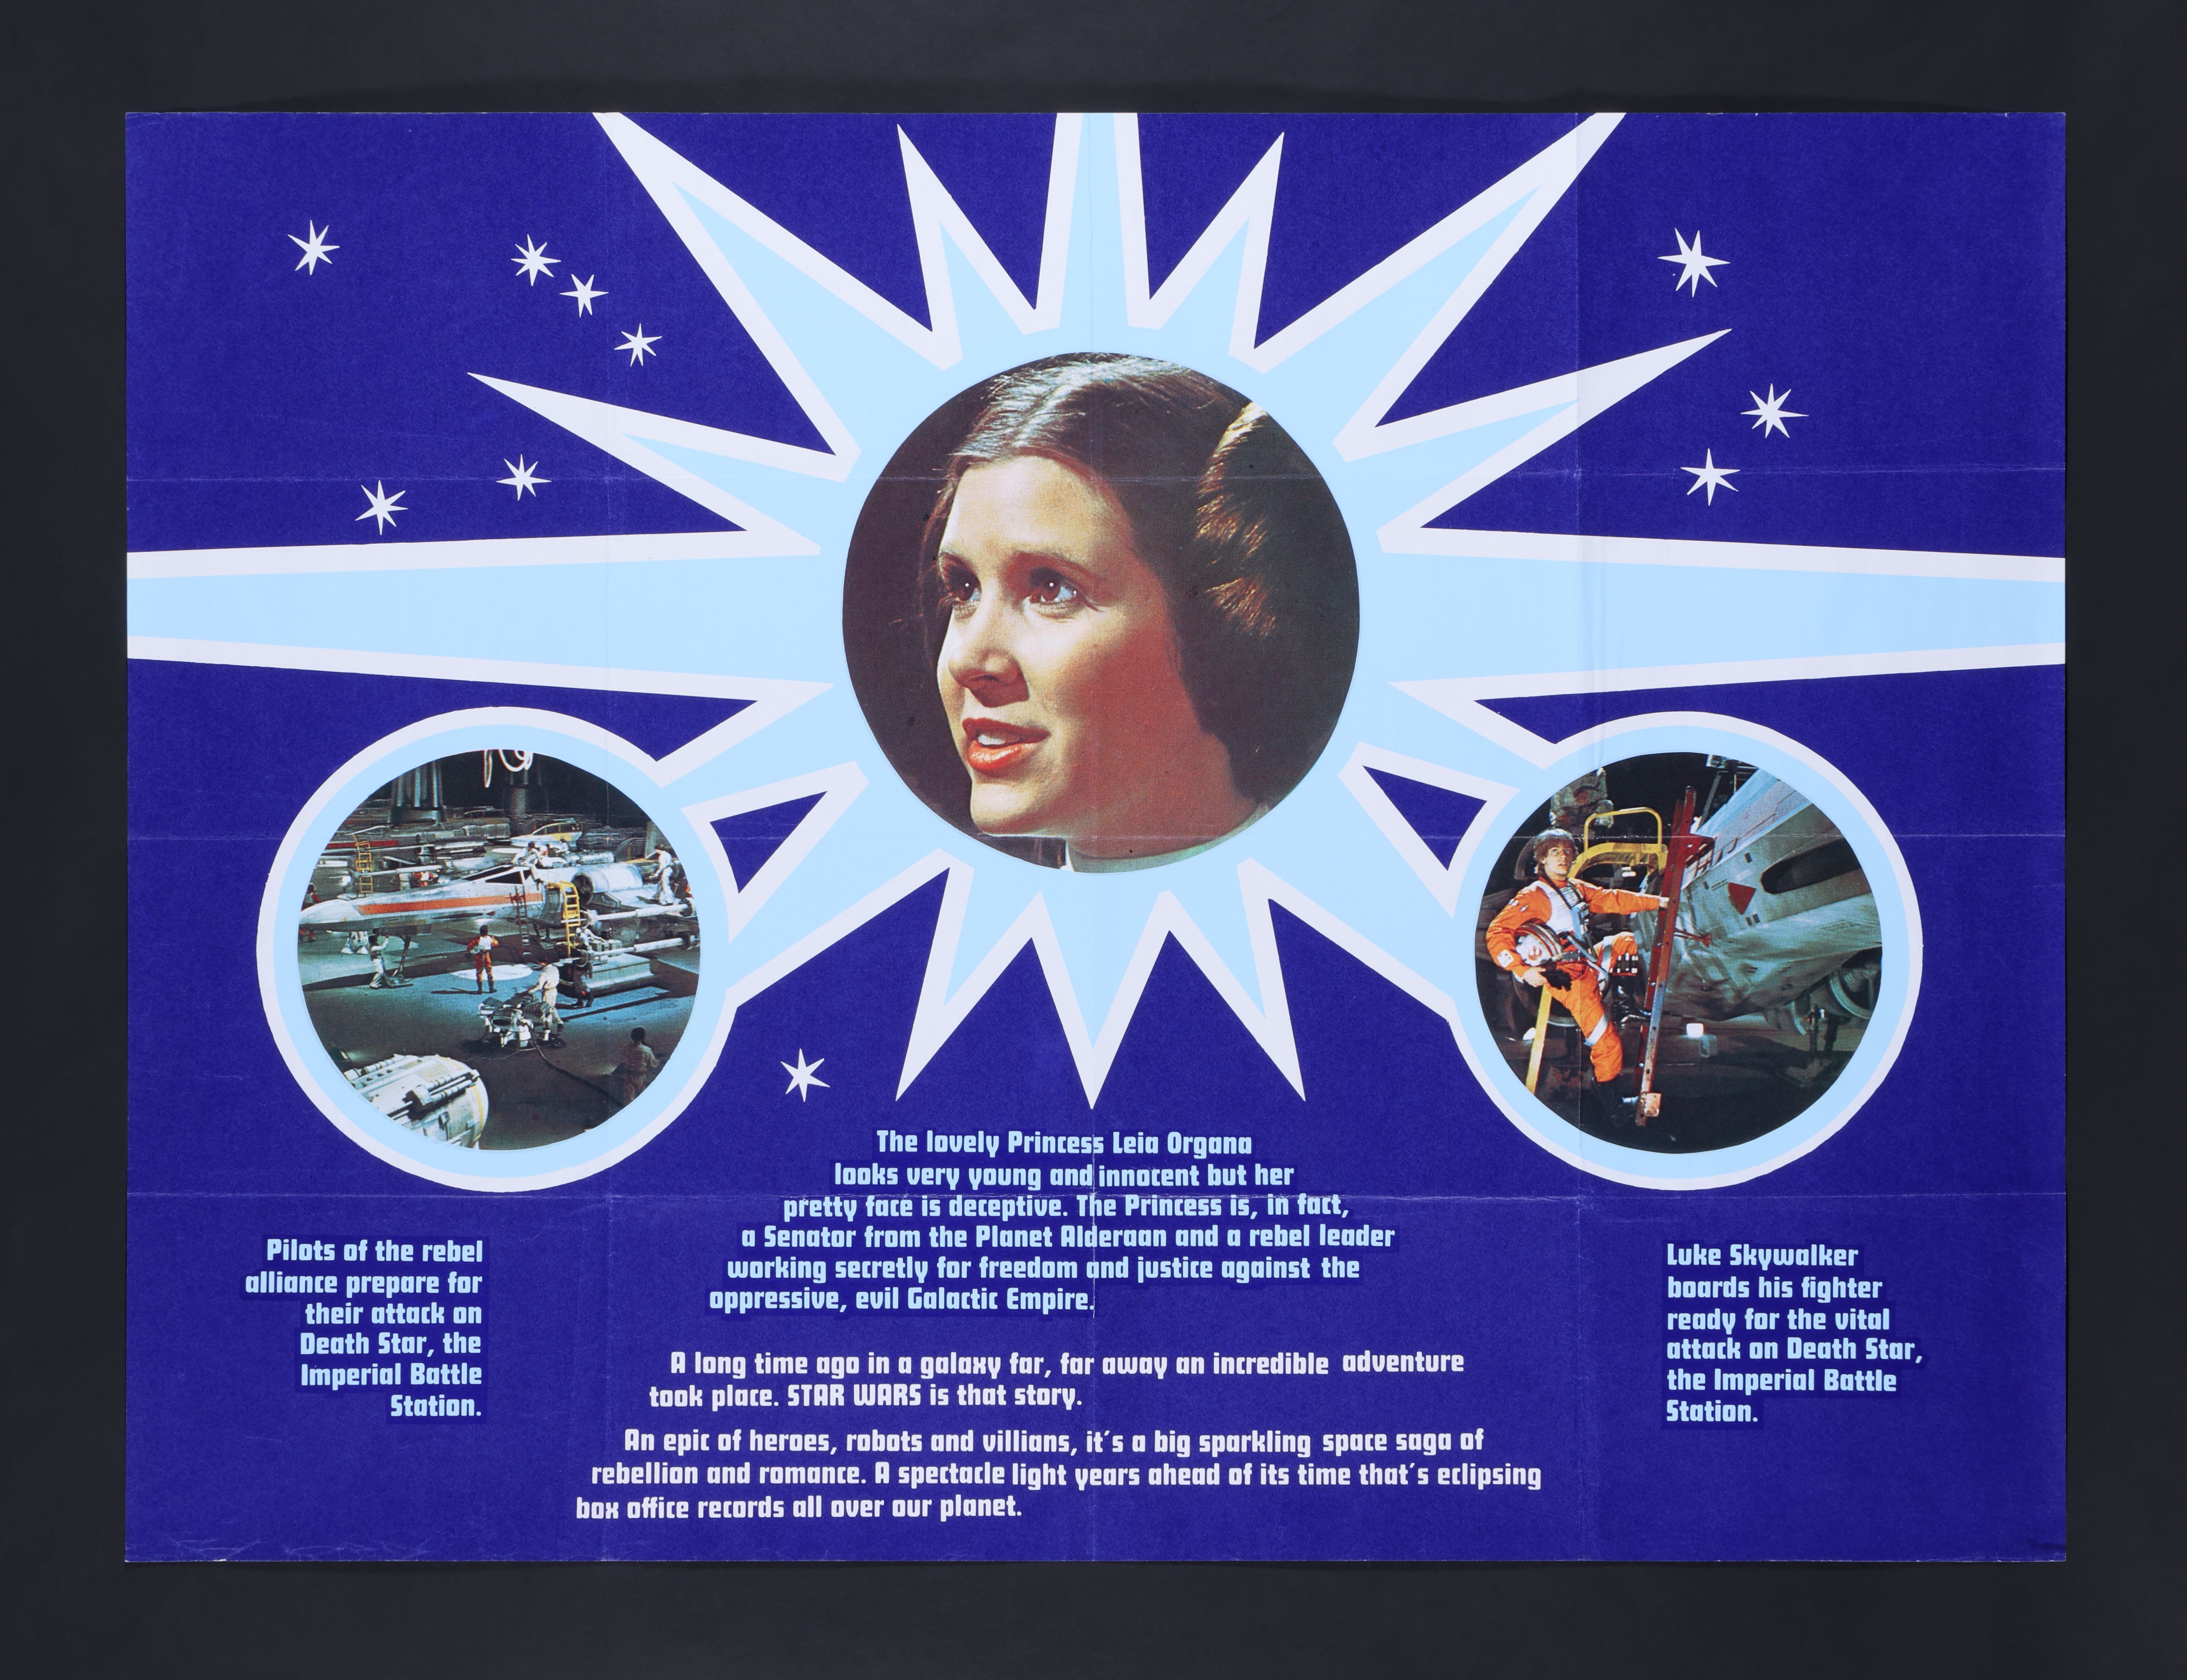 STAR WARS: A NEW HOPE (1977) - David Frangioni Collection: Complete Marler Haley Set - Quad and Four